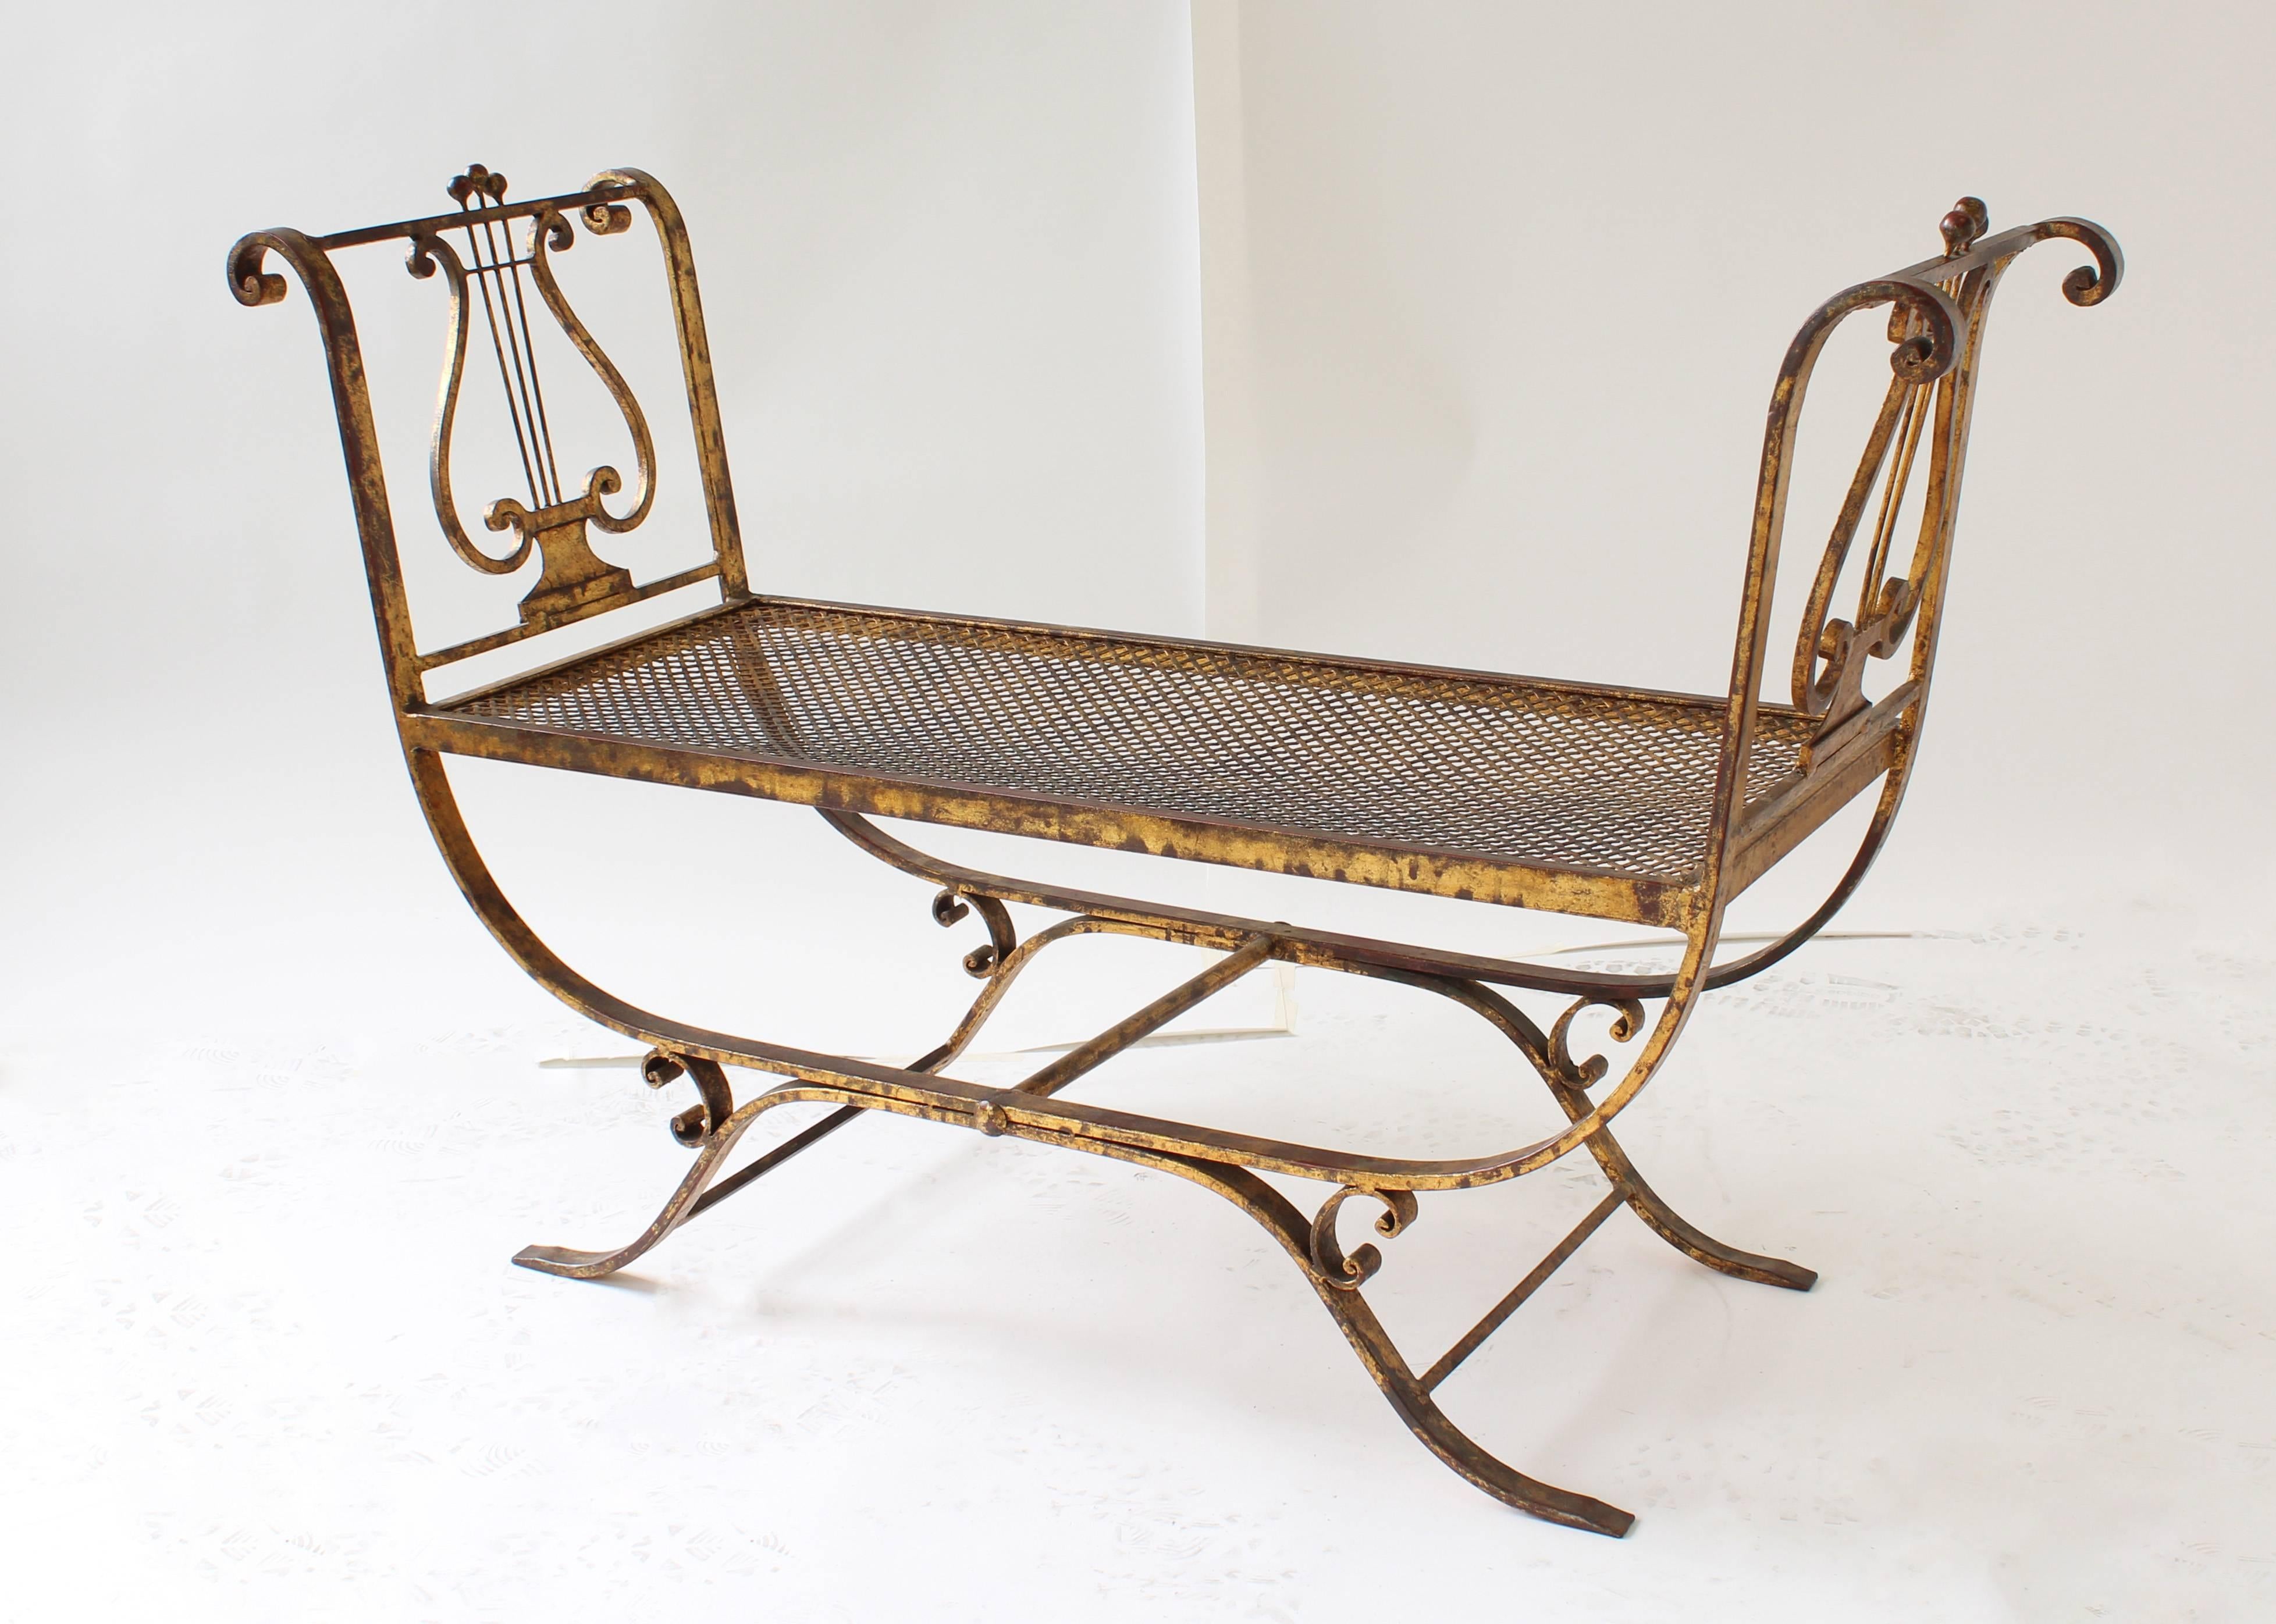 Wrought iron painted and gilt chandelier with fifteen arms. Crystal pentalogs and floral details. From the Hollywood Regency period. Gold fabric ruffled chain cover included. Incandescent lamping. Included in purchase is gilt metal lyre form bench.